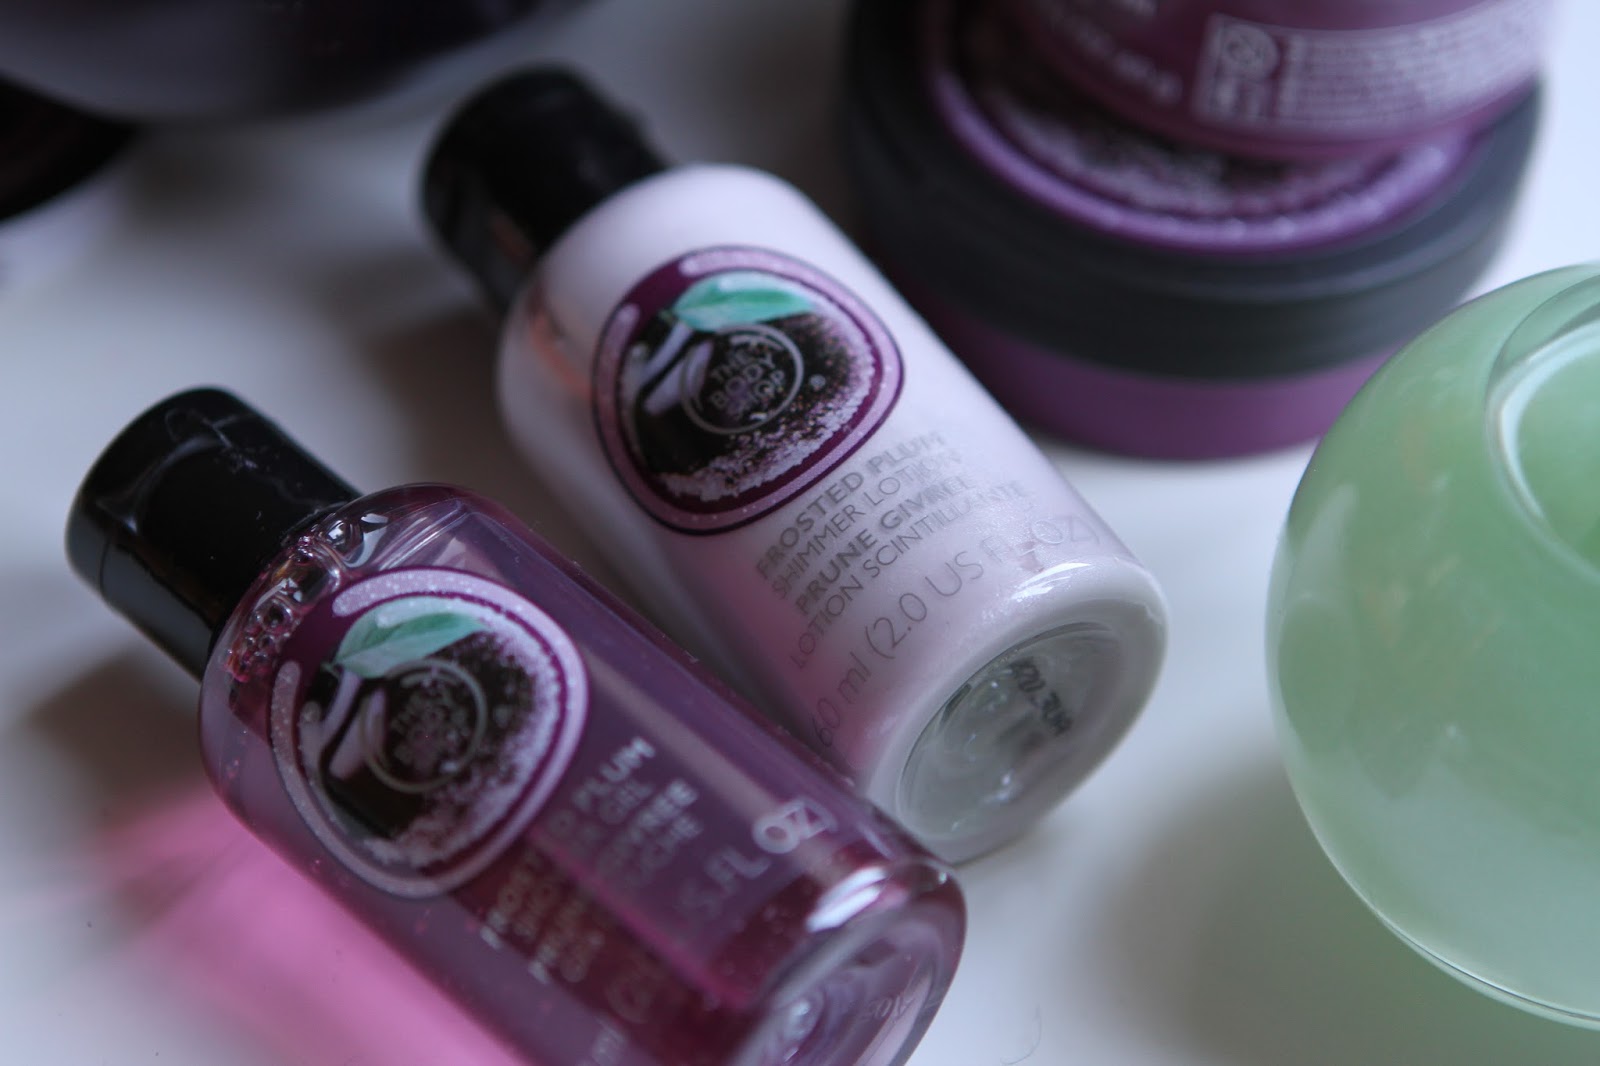 The body shop frosted plum